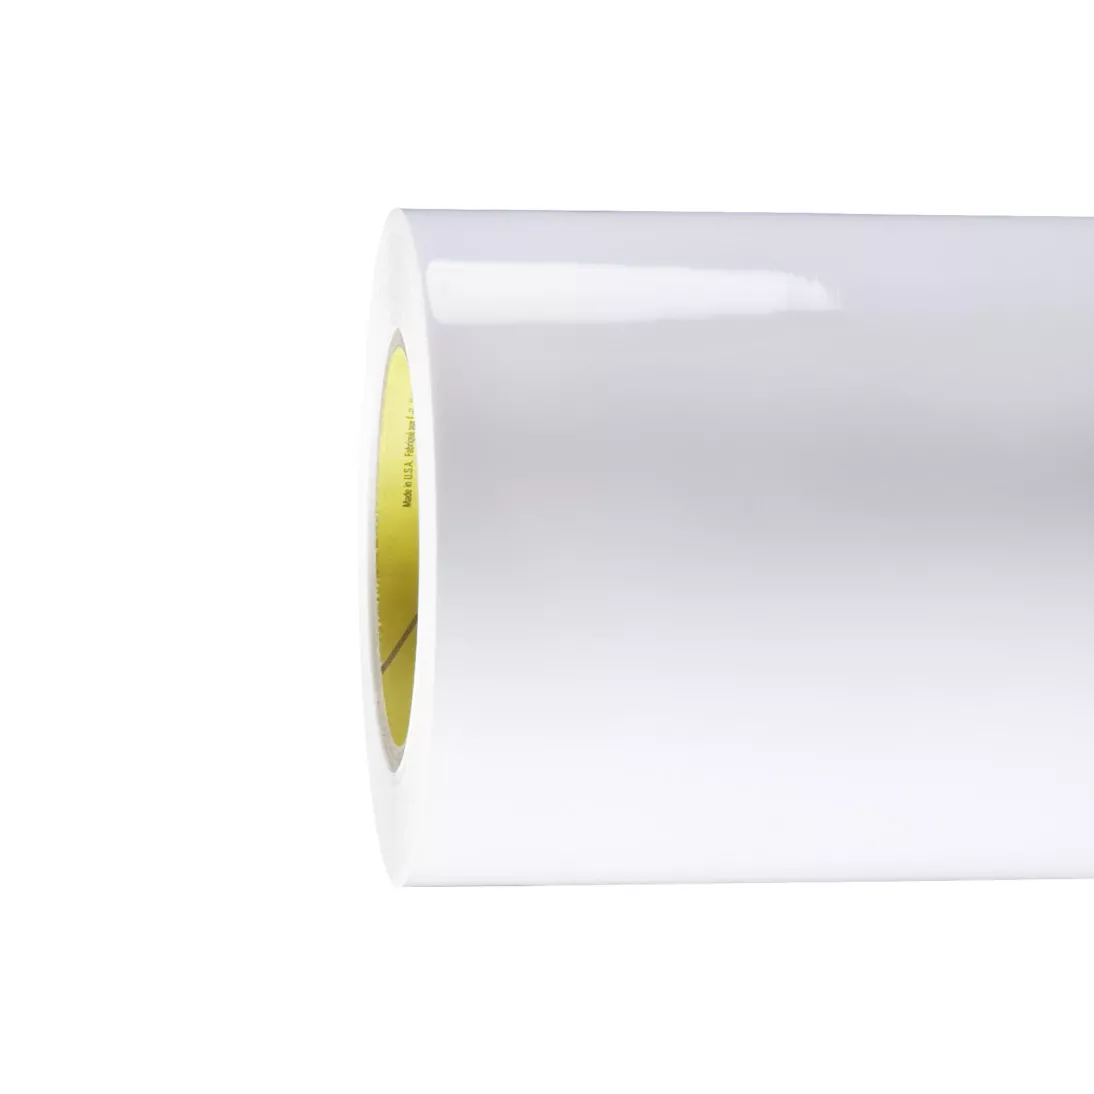 3M™ Wind Blade Protection Tape 1.0 W8607, Splice Free, Poly Liner, 10 in
x 36 yd, Colorless, 1 /Case